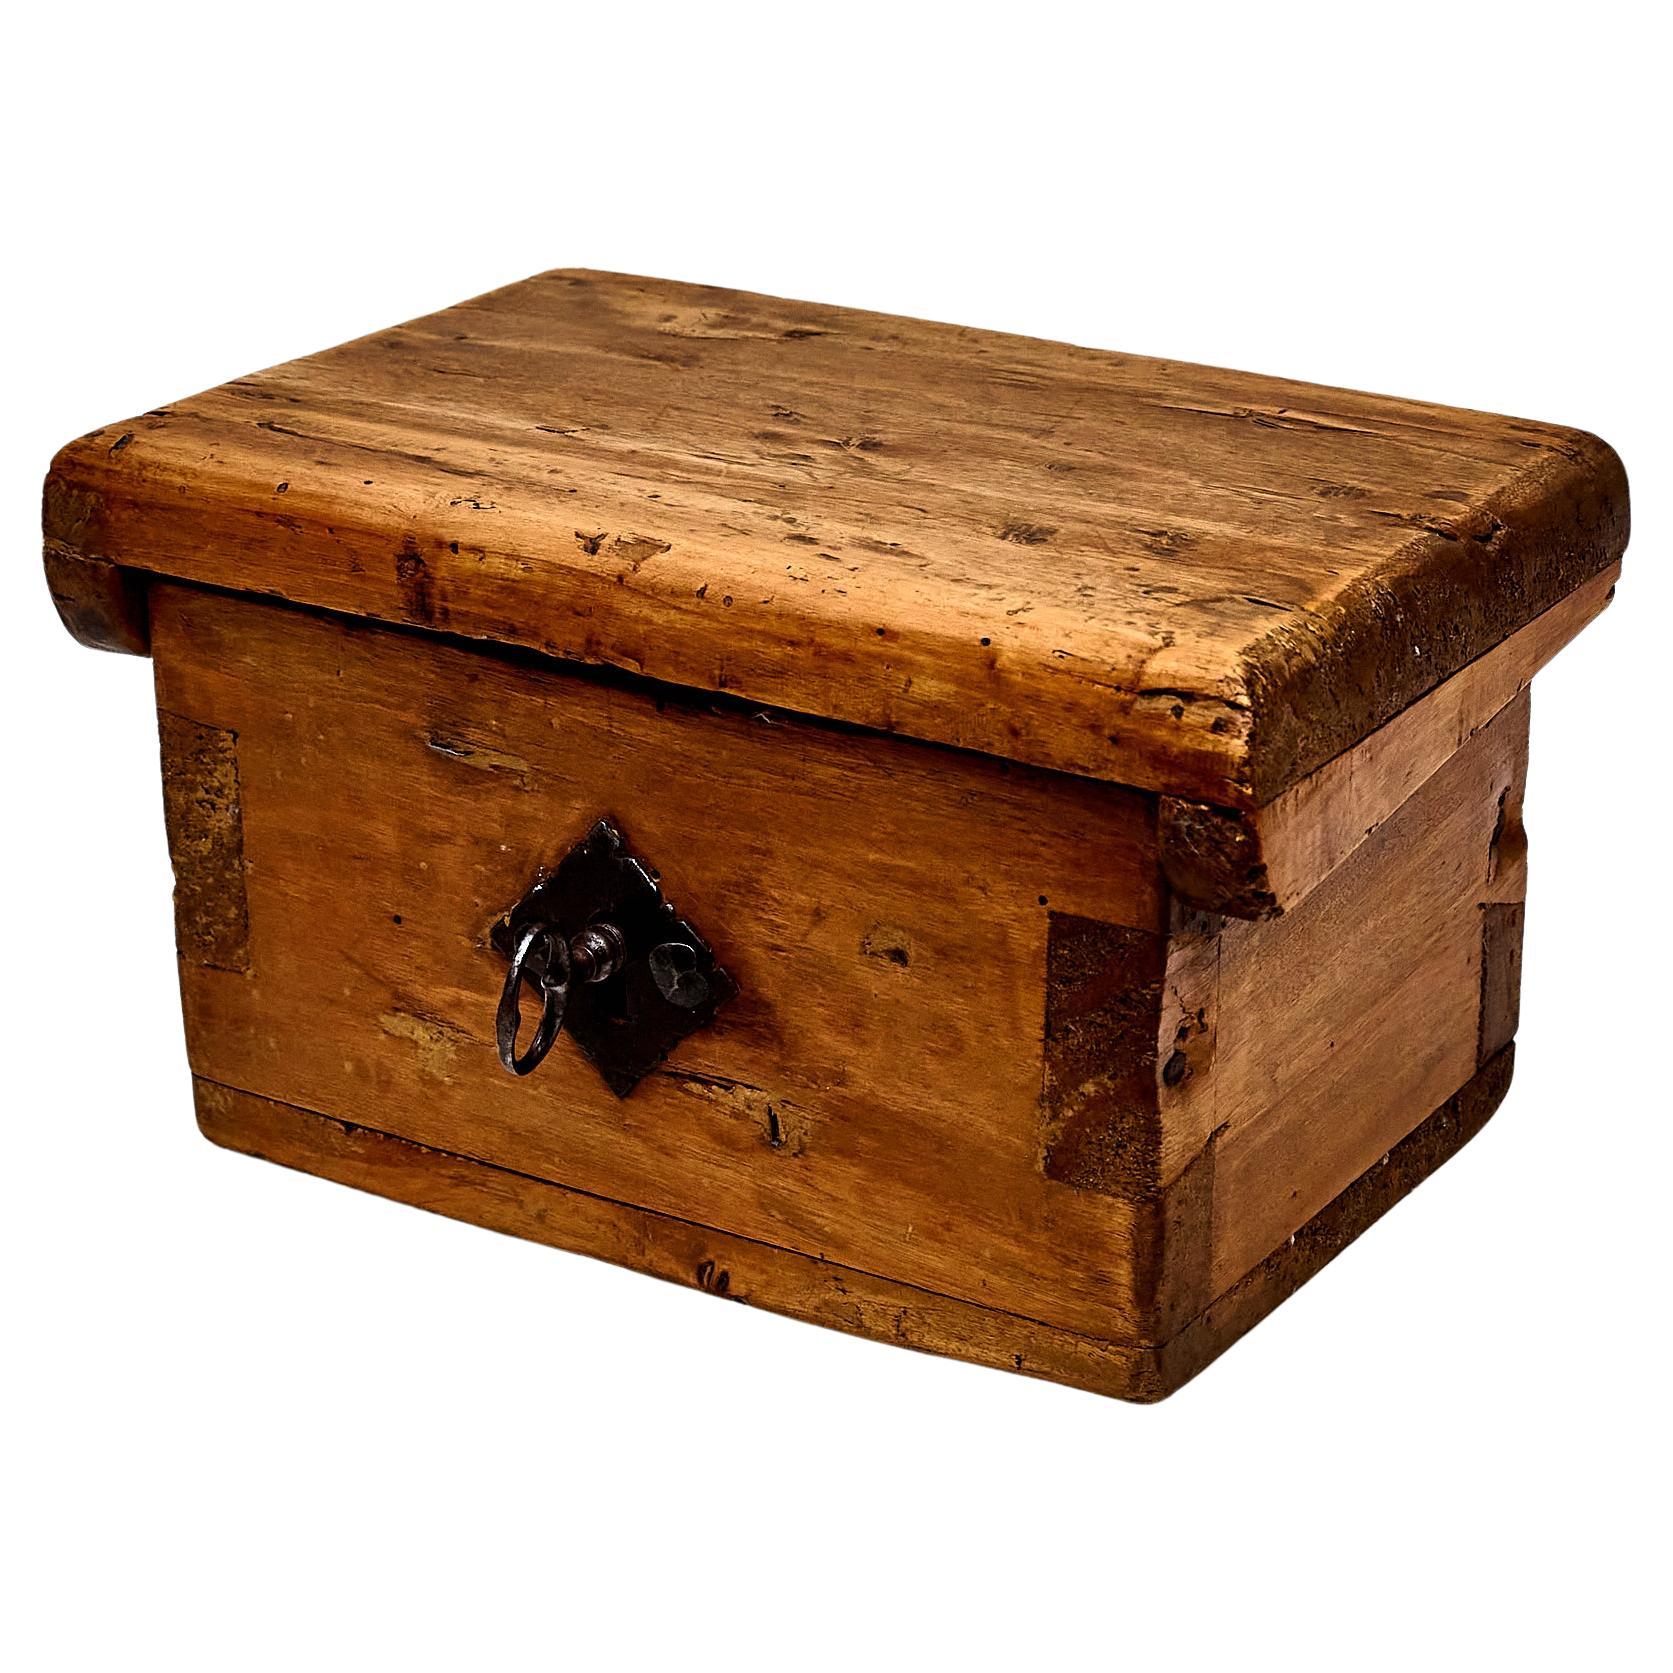 Rustic Wood Box with Key Lock.

Manufactured in France, circa 1930.

In original condition with minor wear consistent of age and use, preserving a beautiful patina.

Materials: 
Wood, metal

Dimensions: 
D 20 cm x W 25 cm x H 15 cm

Important